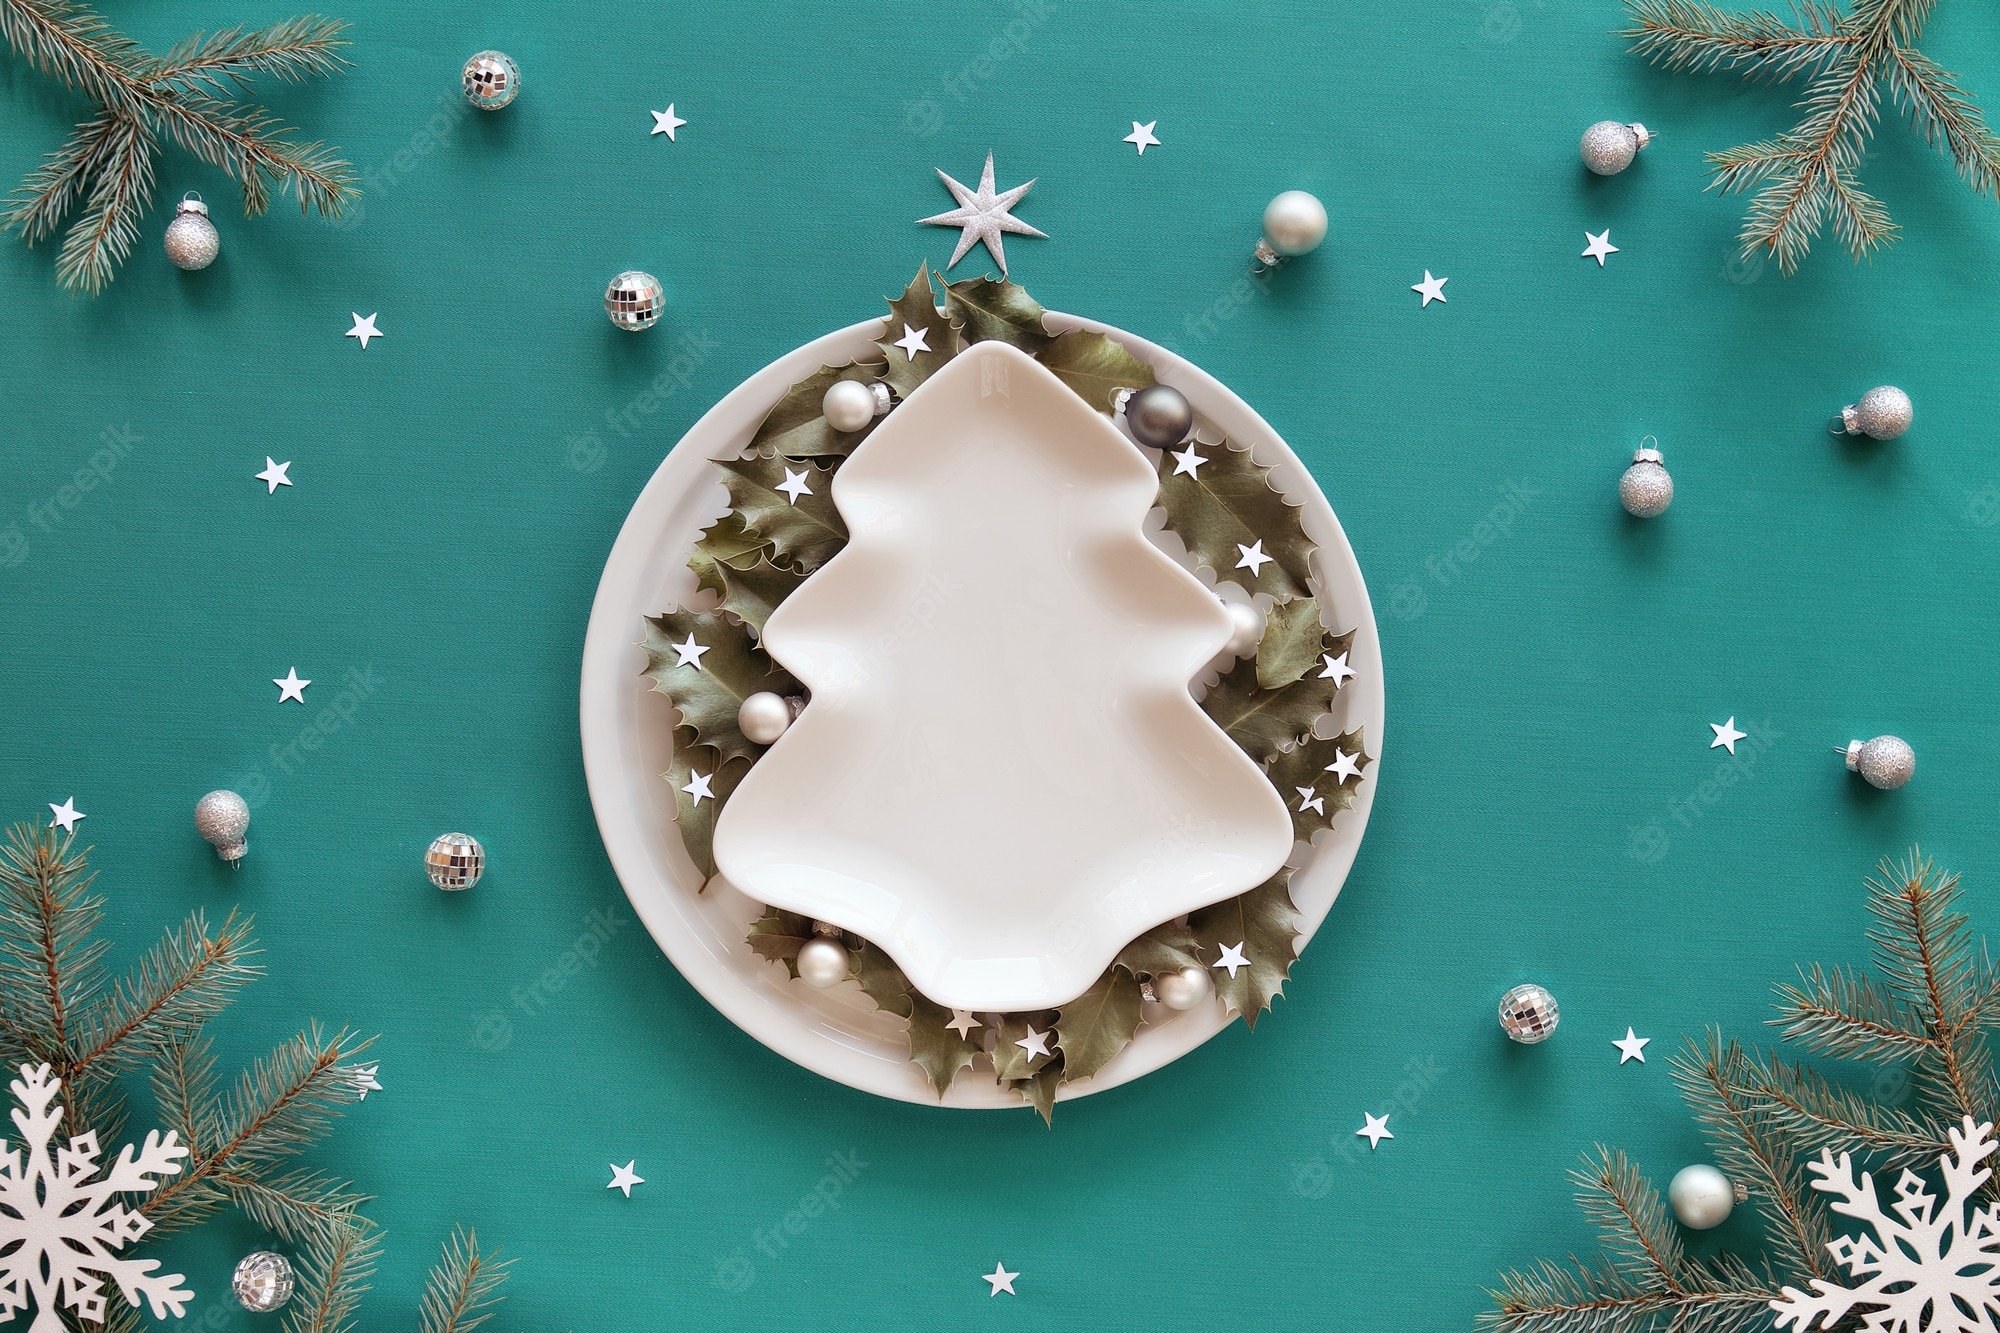 Premium Photo. Christmas Background In Green And White. Xmas Tree Shape Plate With Copy Space On Table Covered With Green Mint Textile. Fir Tree Twigs And White Decorations. Holly Leaves On Round